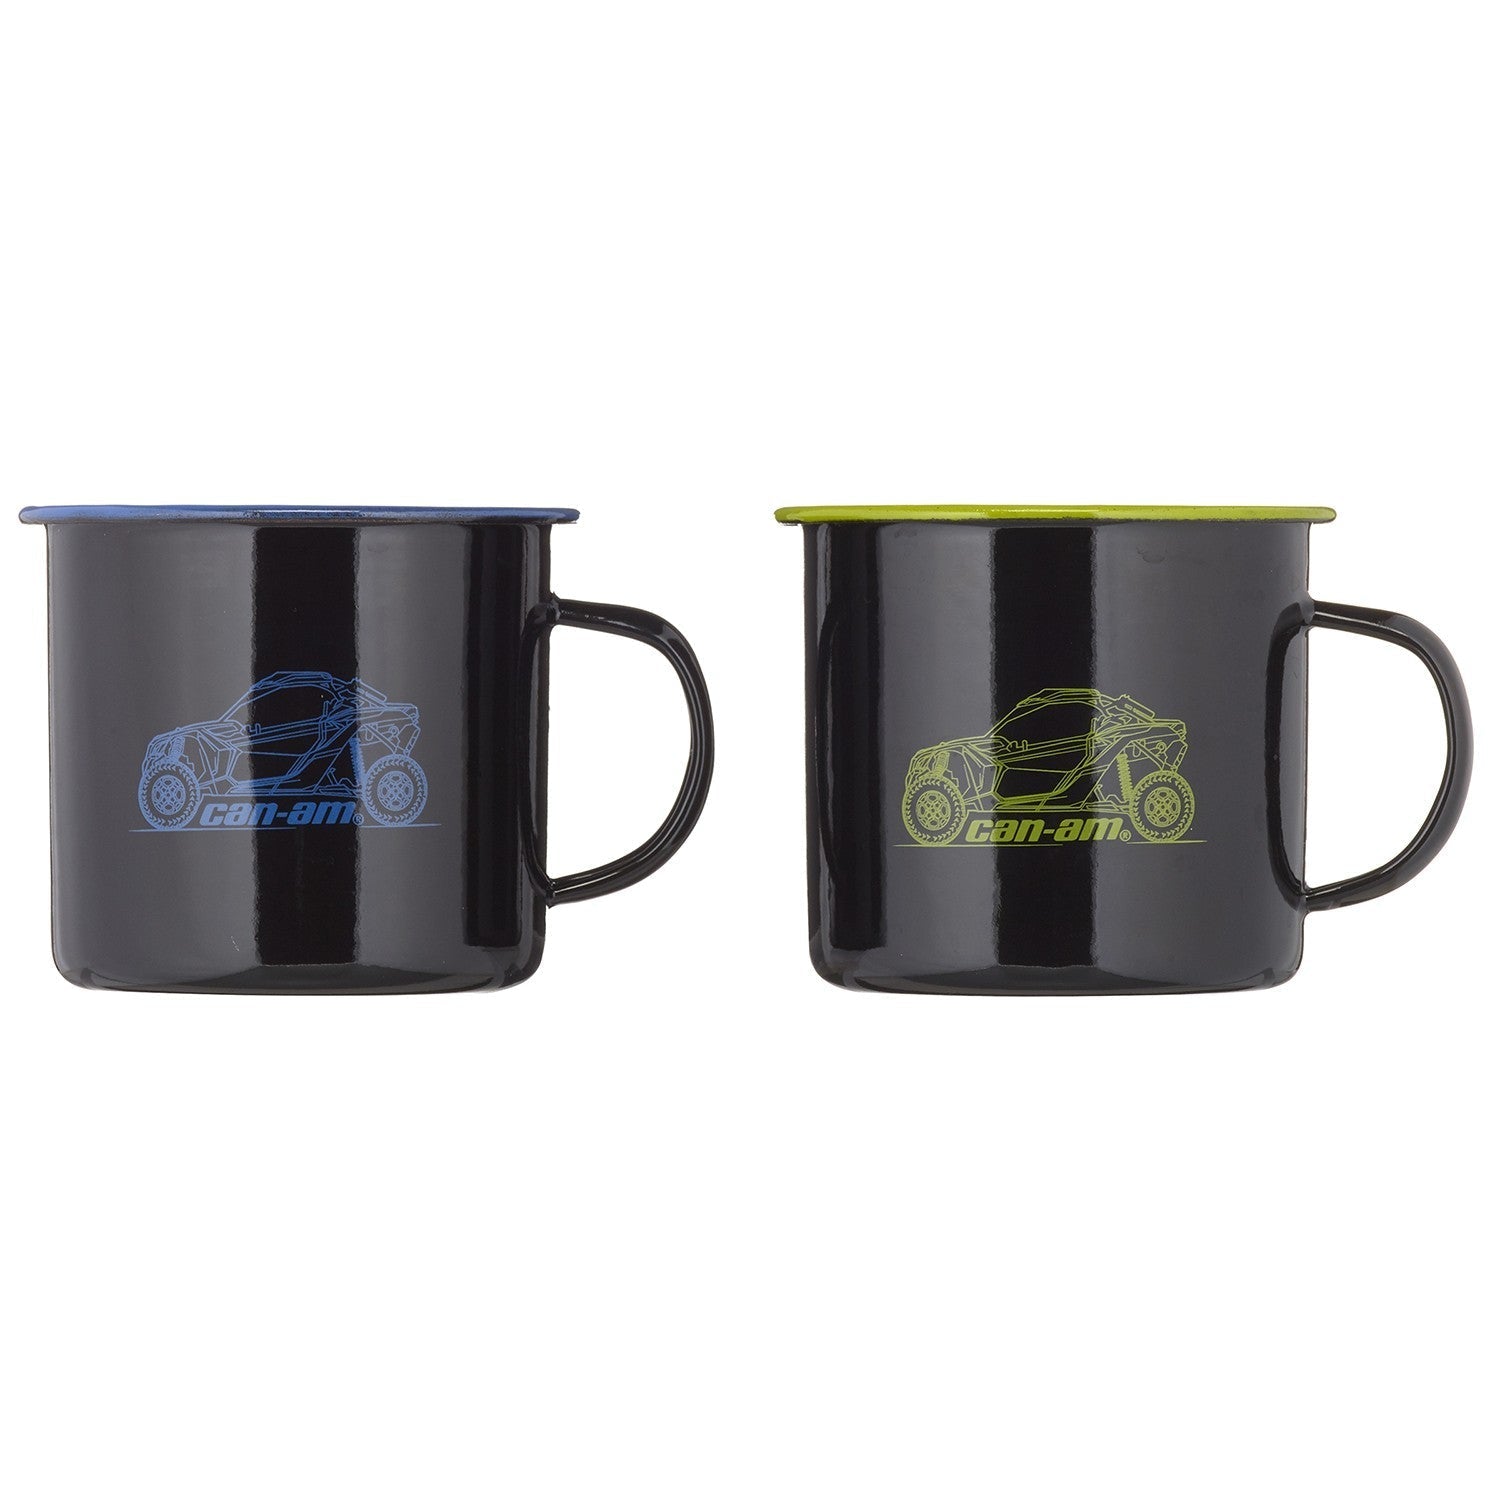 Can-Am Off-Road Set Of 18 oz Enamel Mugs (Non-Current)